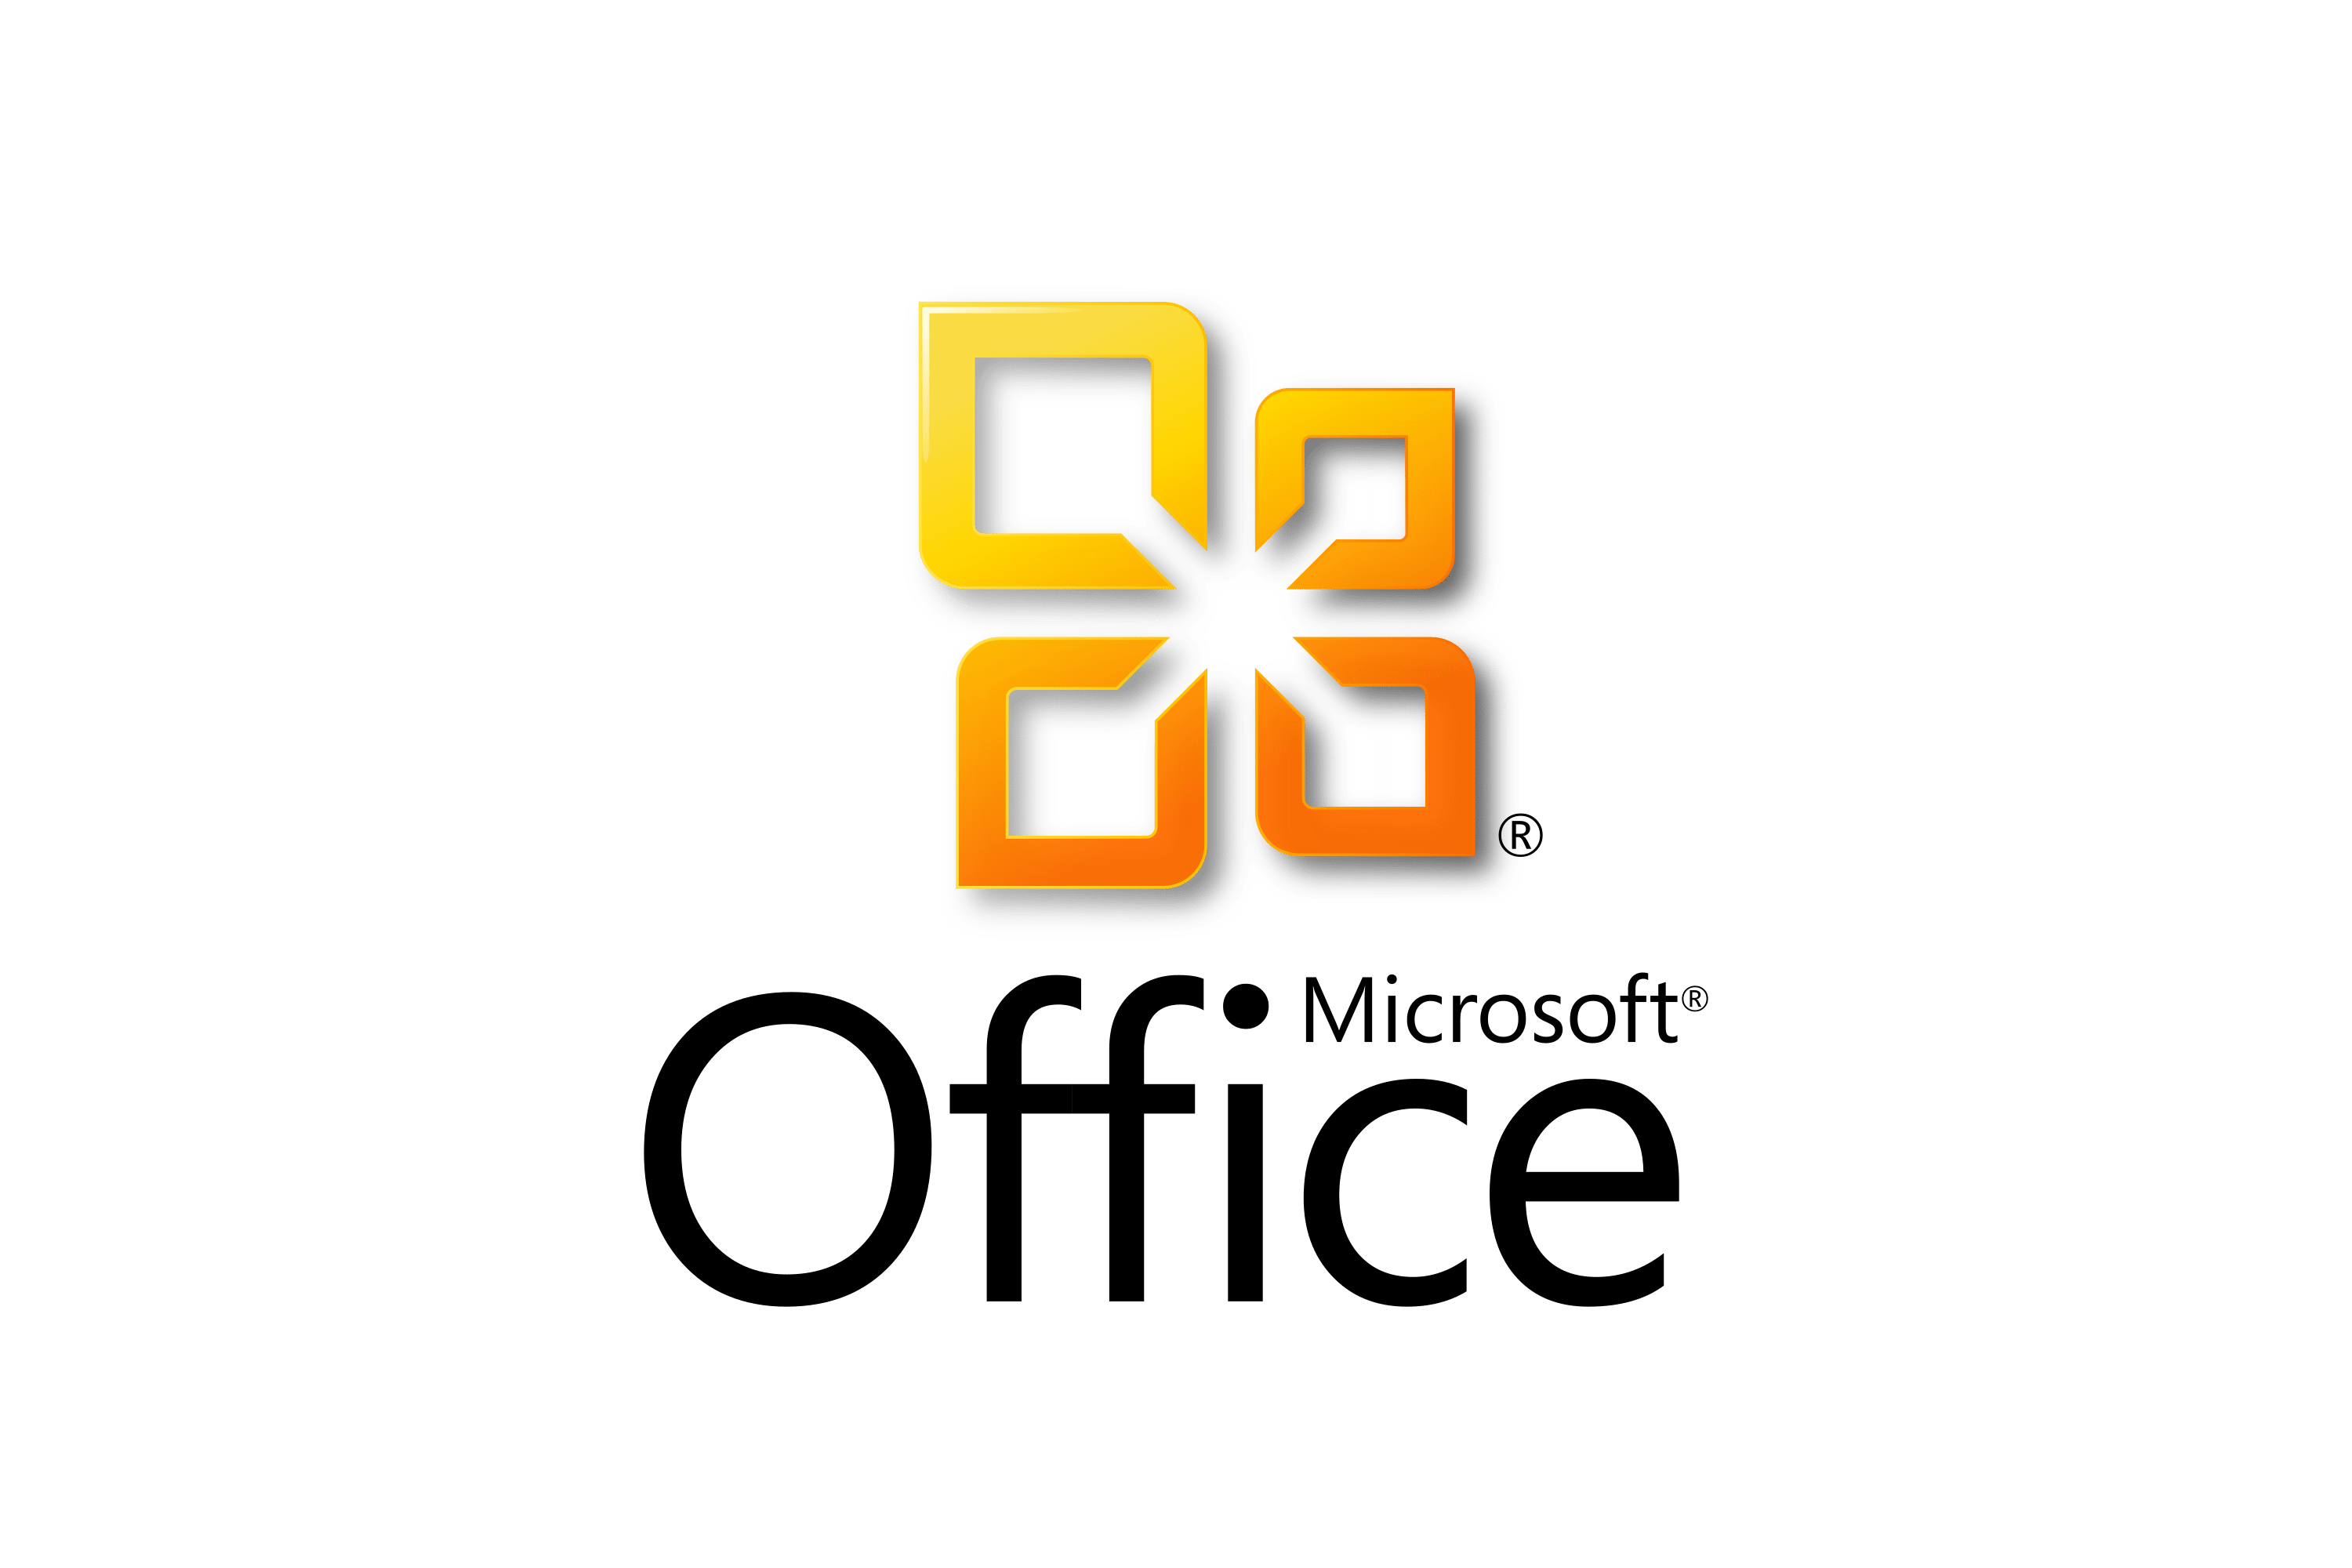 Download Microsoft PowerPoint Logo PNG and Vector (PDF, SVG, Ai, EPS) Free